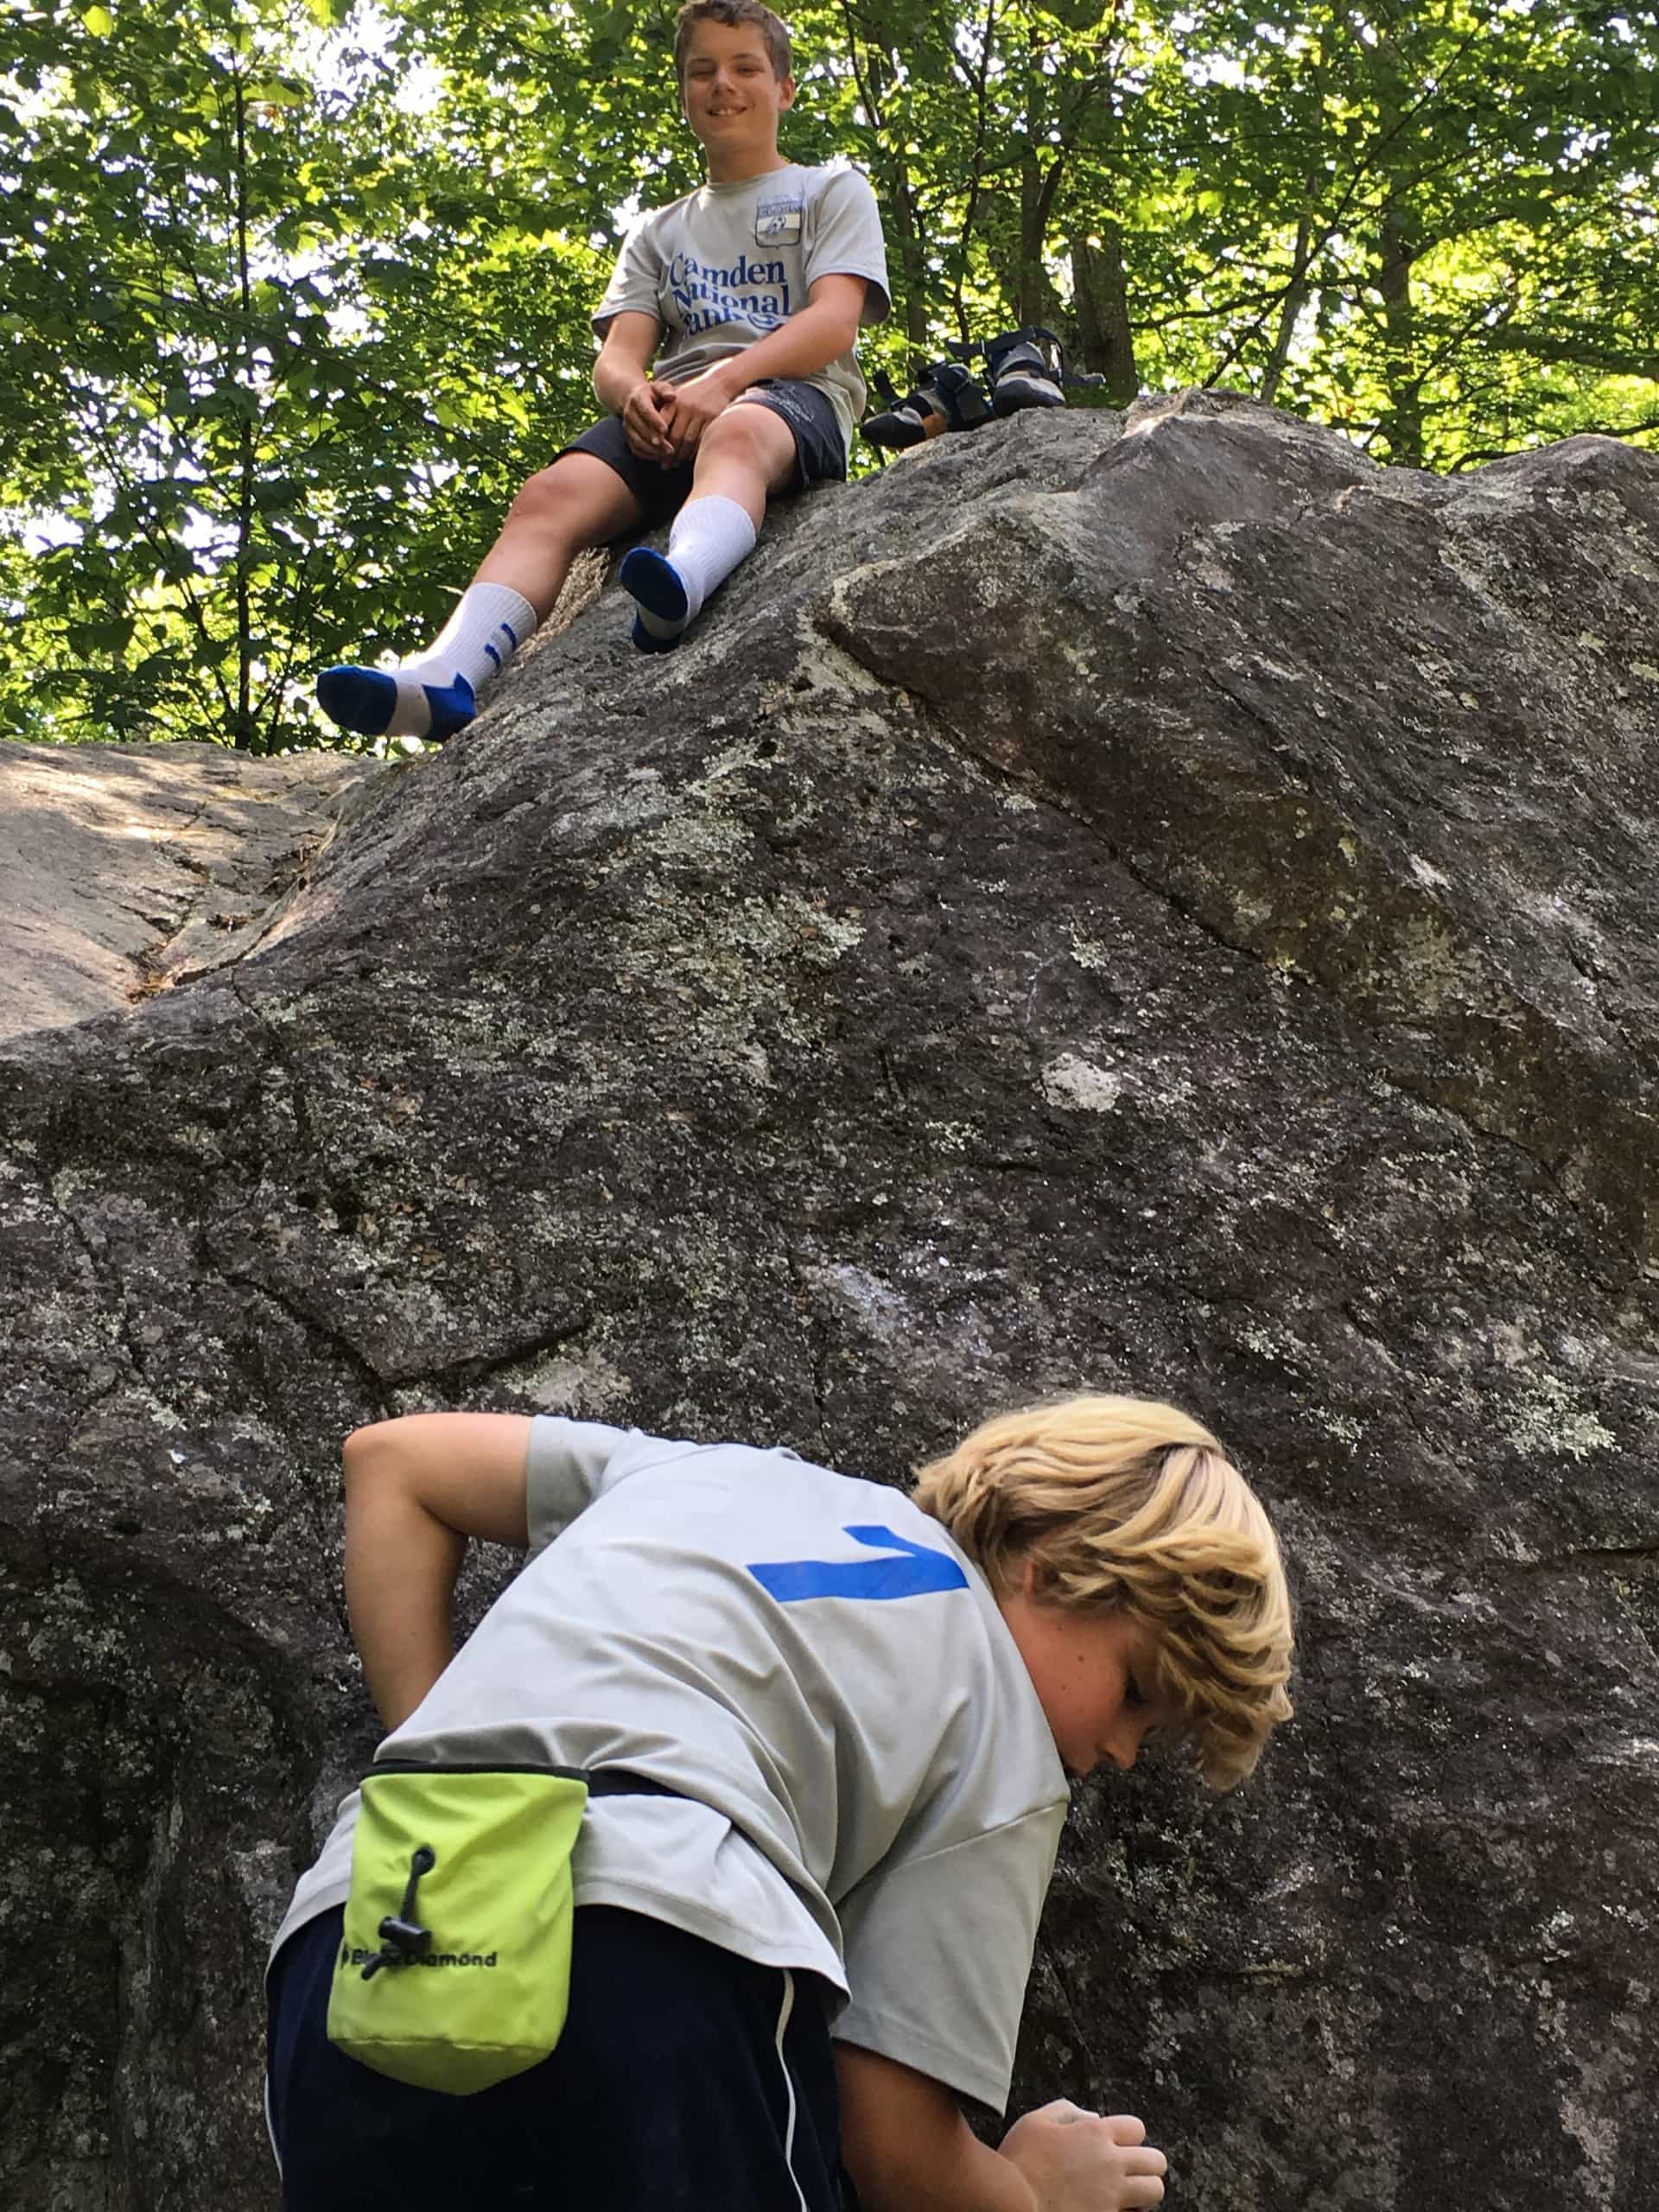 Declan and Eamon climbing at Rumney in New Hampshire